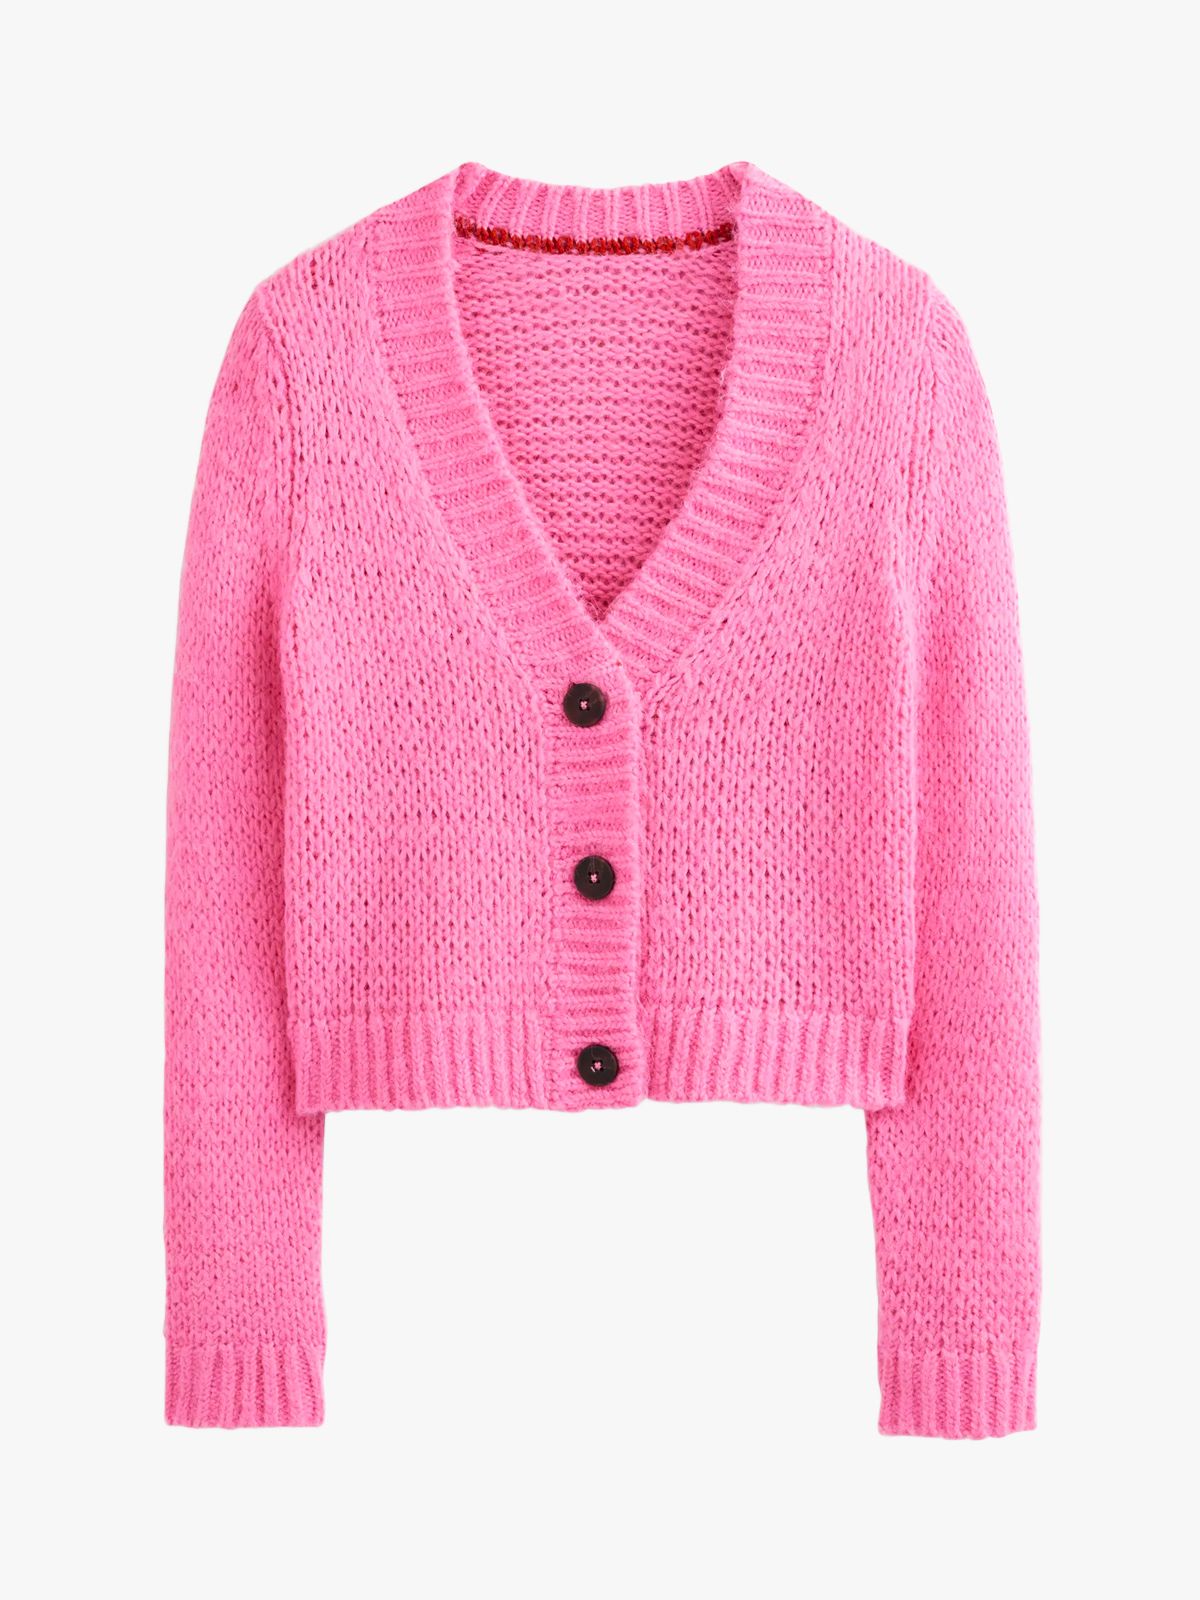 Boden Open Stitch Cardigan, Candy Floss Pink